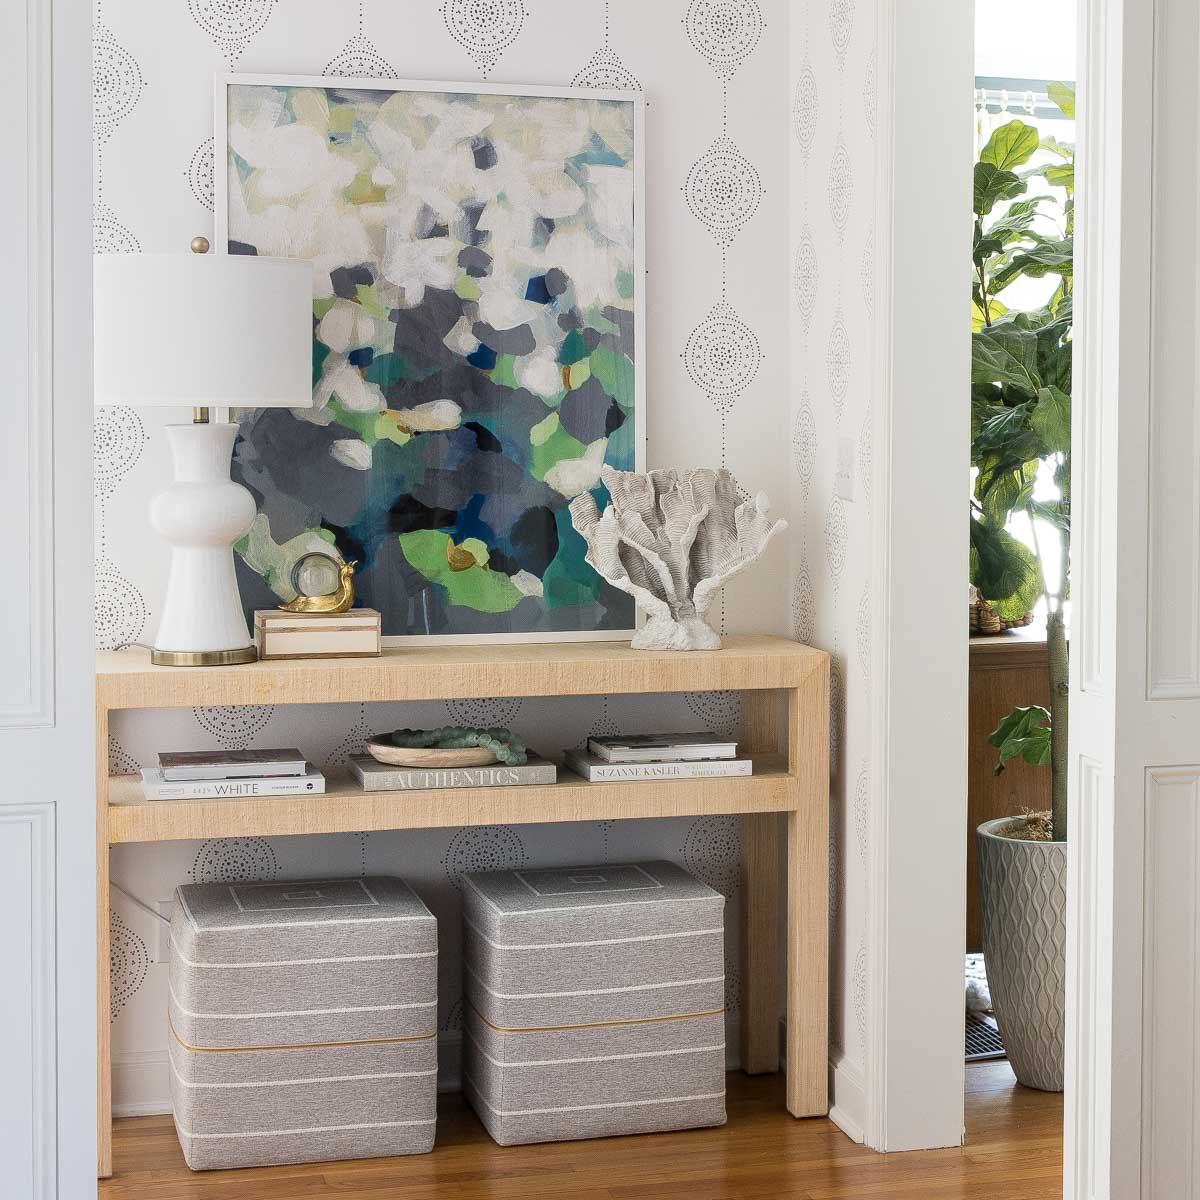 Console Table Decor: My 10 Favorite Styling Ideas! - Driven by Decor